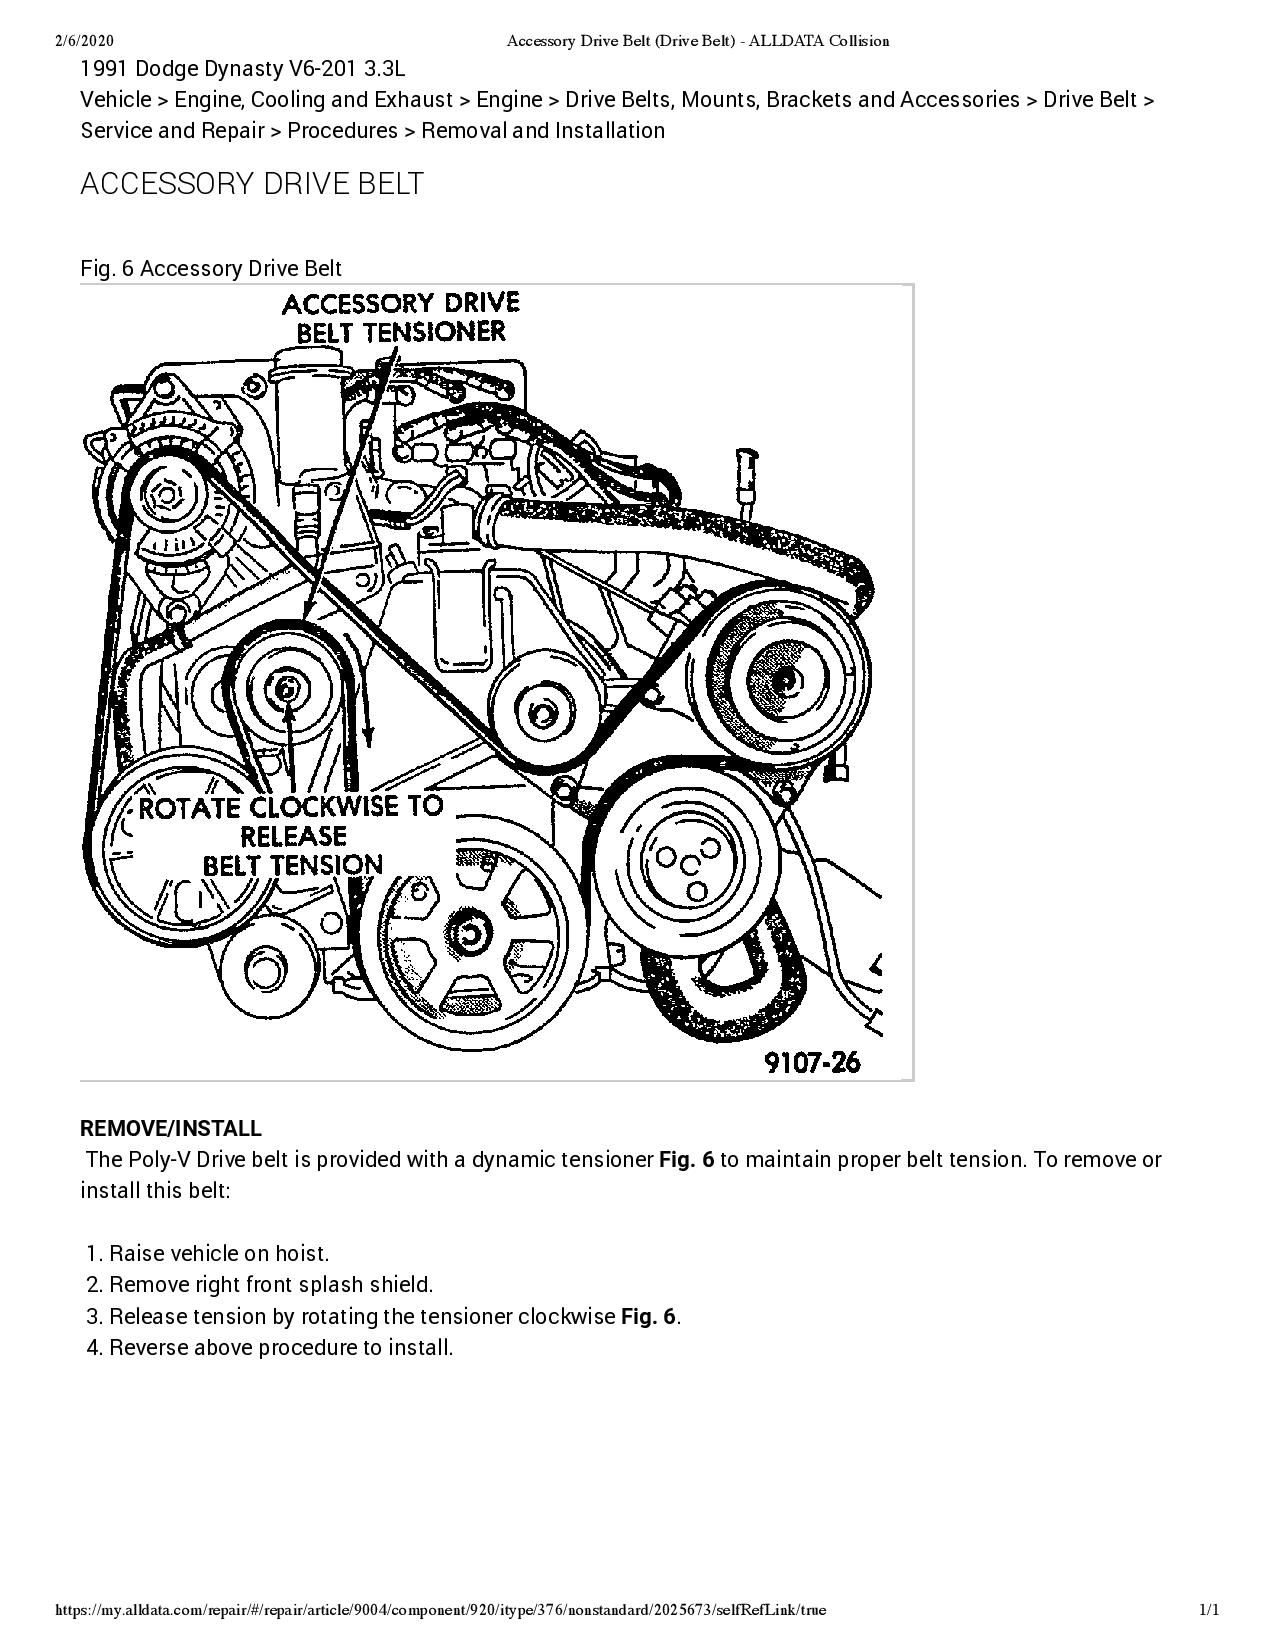 How To Install Serpentine Belt Easily